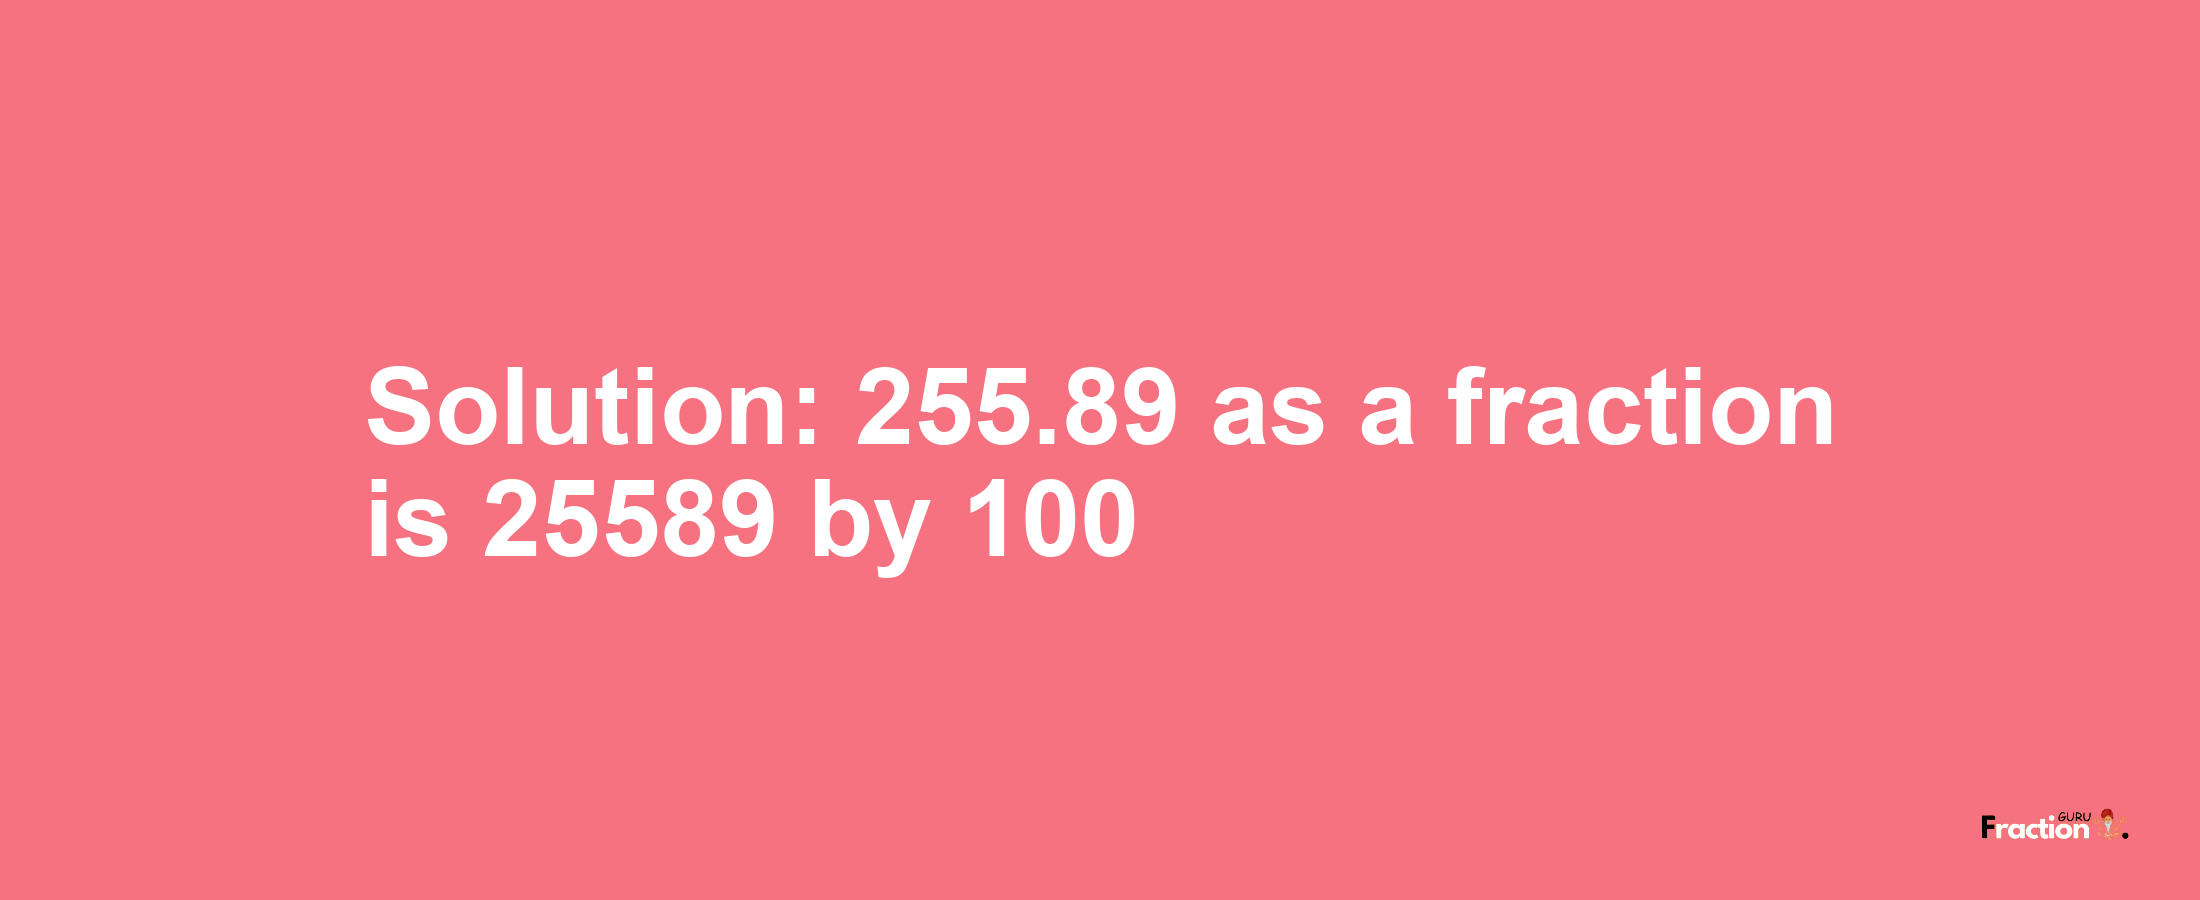 Solution:255.89 as a fraction is 25589/100